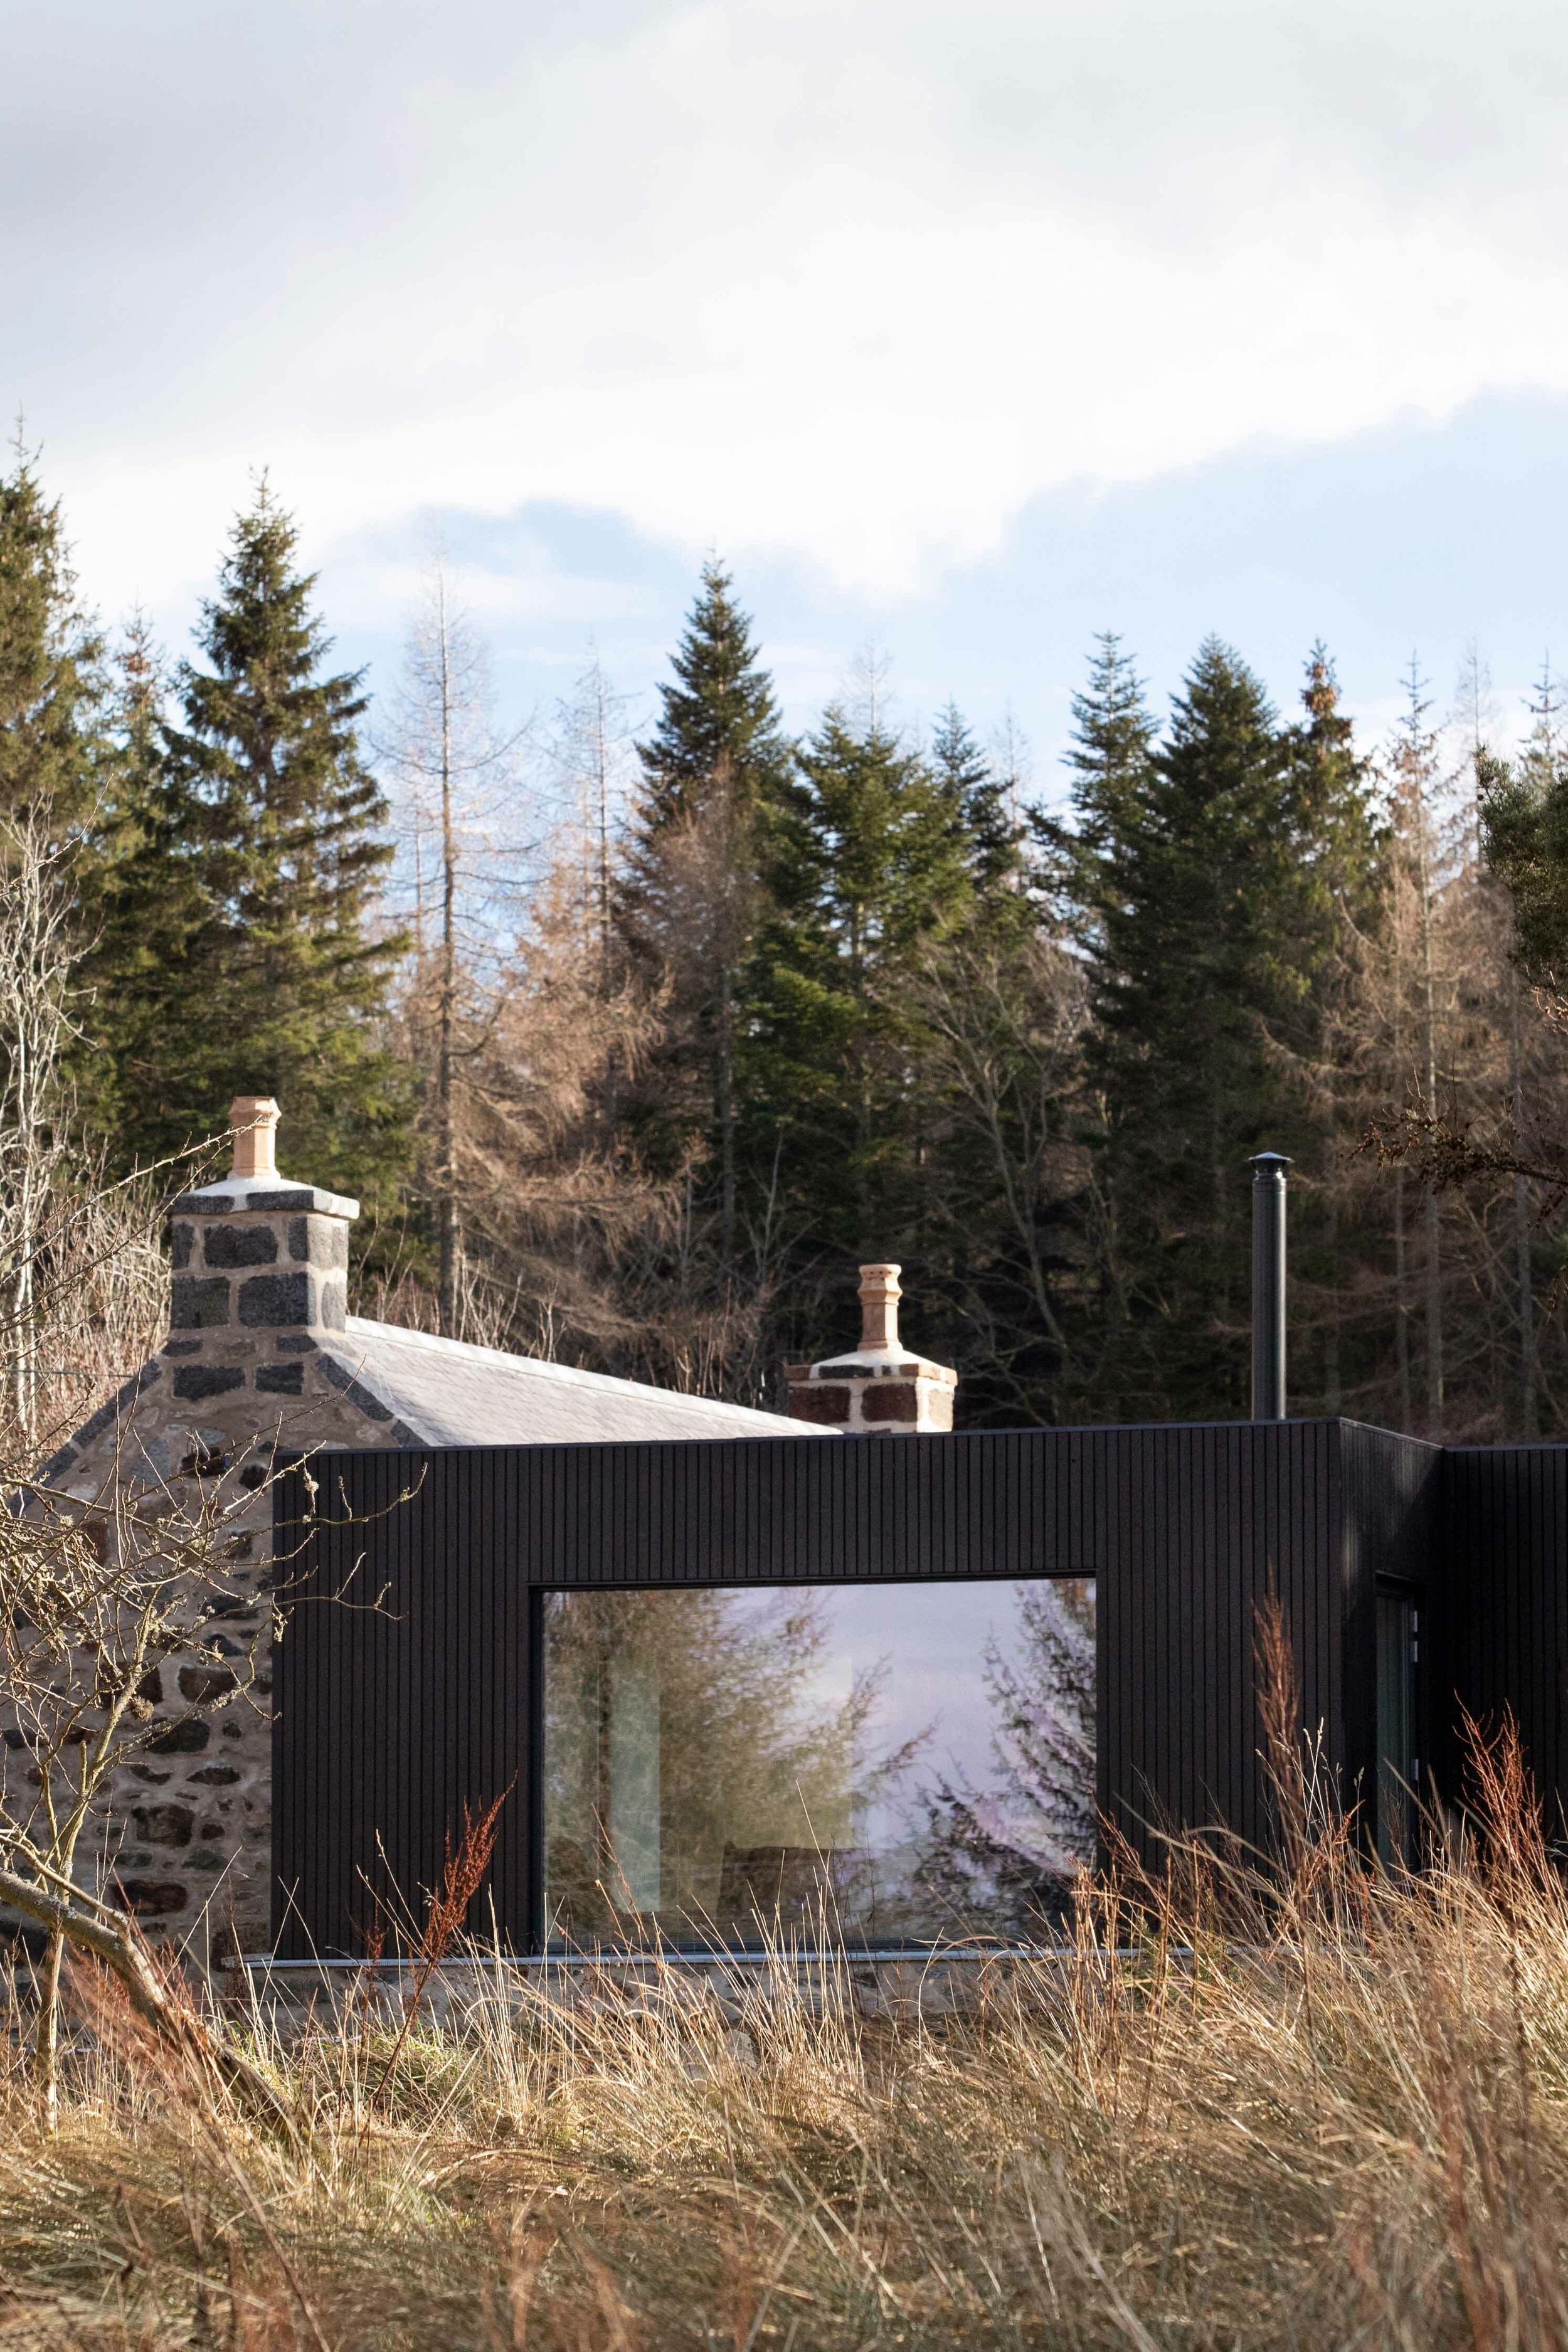 Modern, blackened timber and glass box shaped extension and granite cottage, surrounded by woodland.